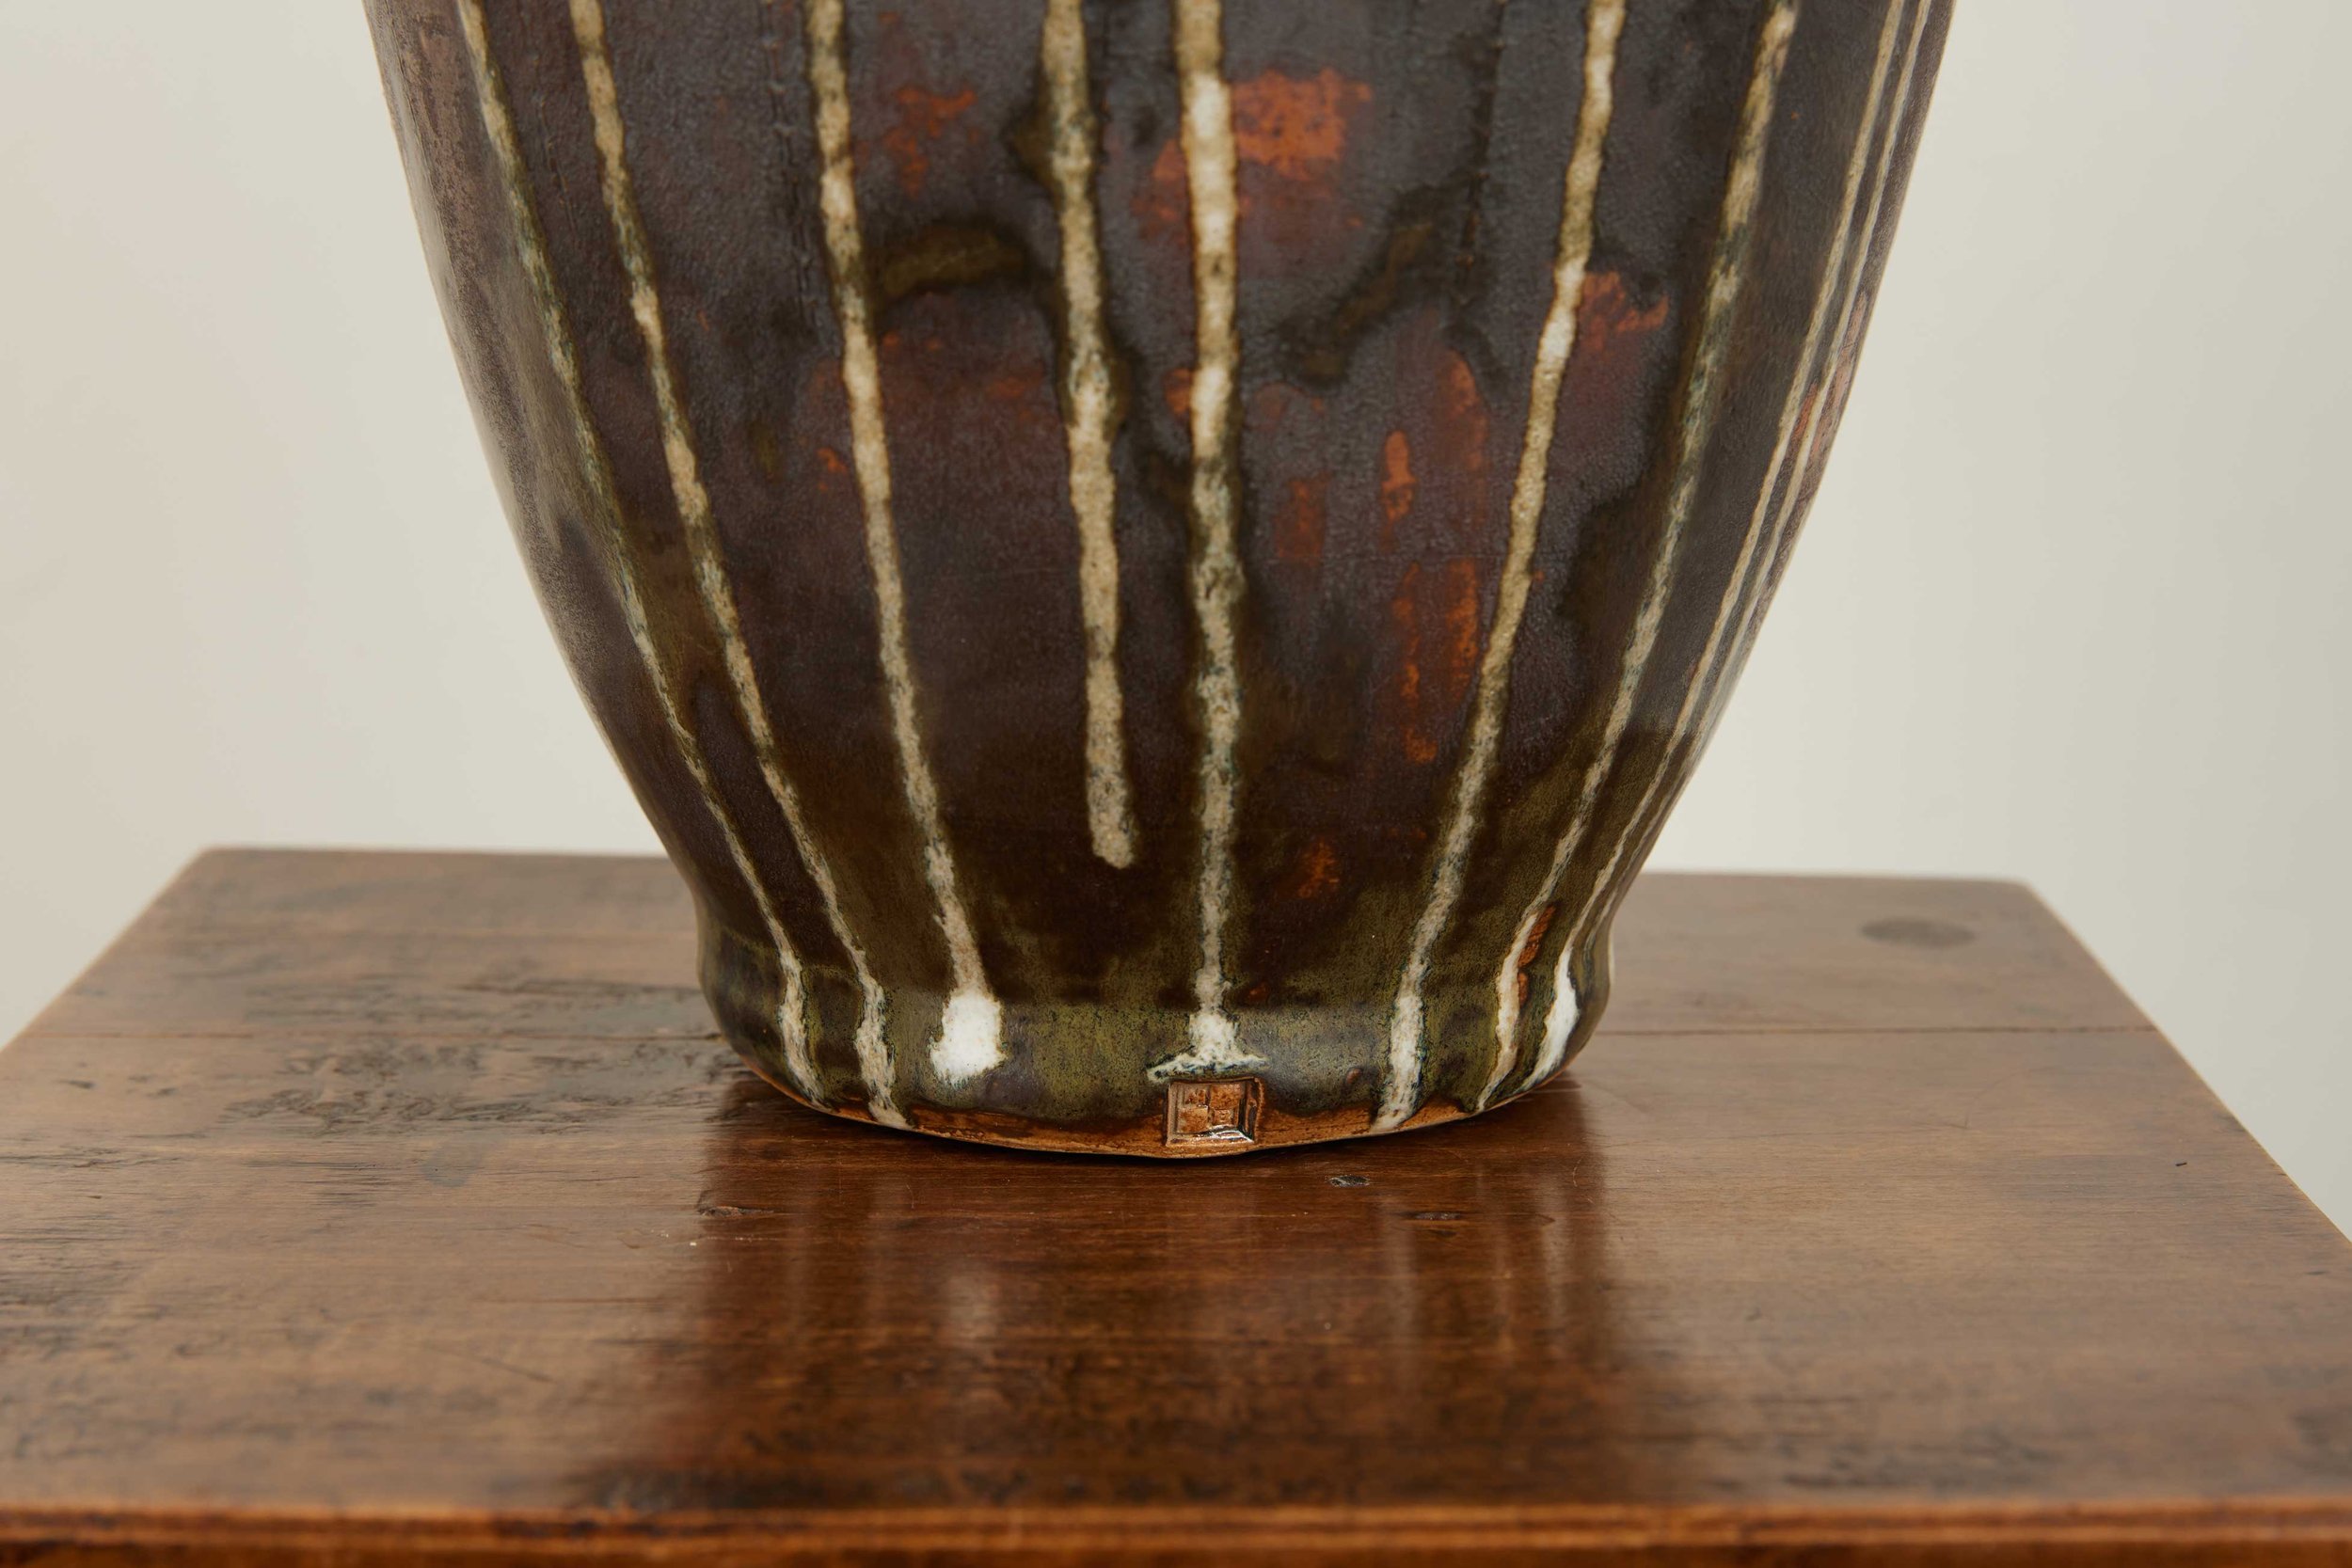 Janette-Mallory-Interior-Design-Shop-Contemporary-Wood-Fired-Brown-Drip-Vase-Detail.jpg